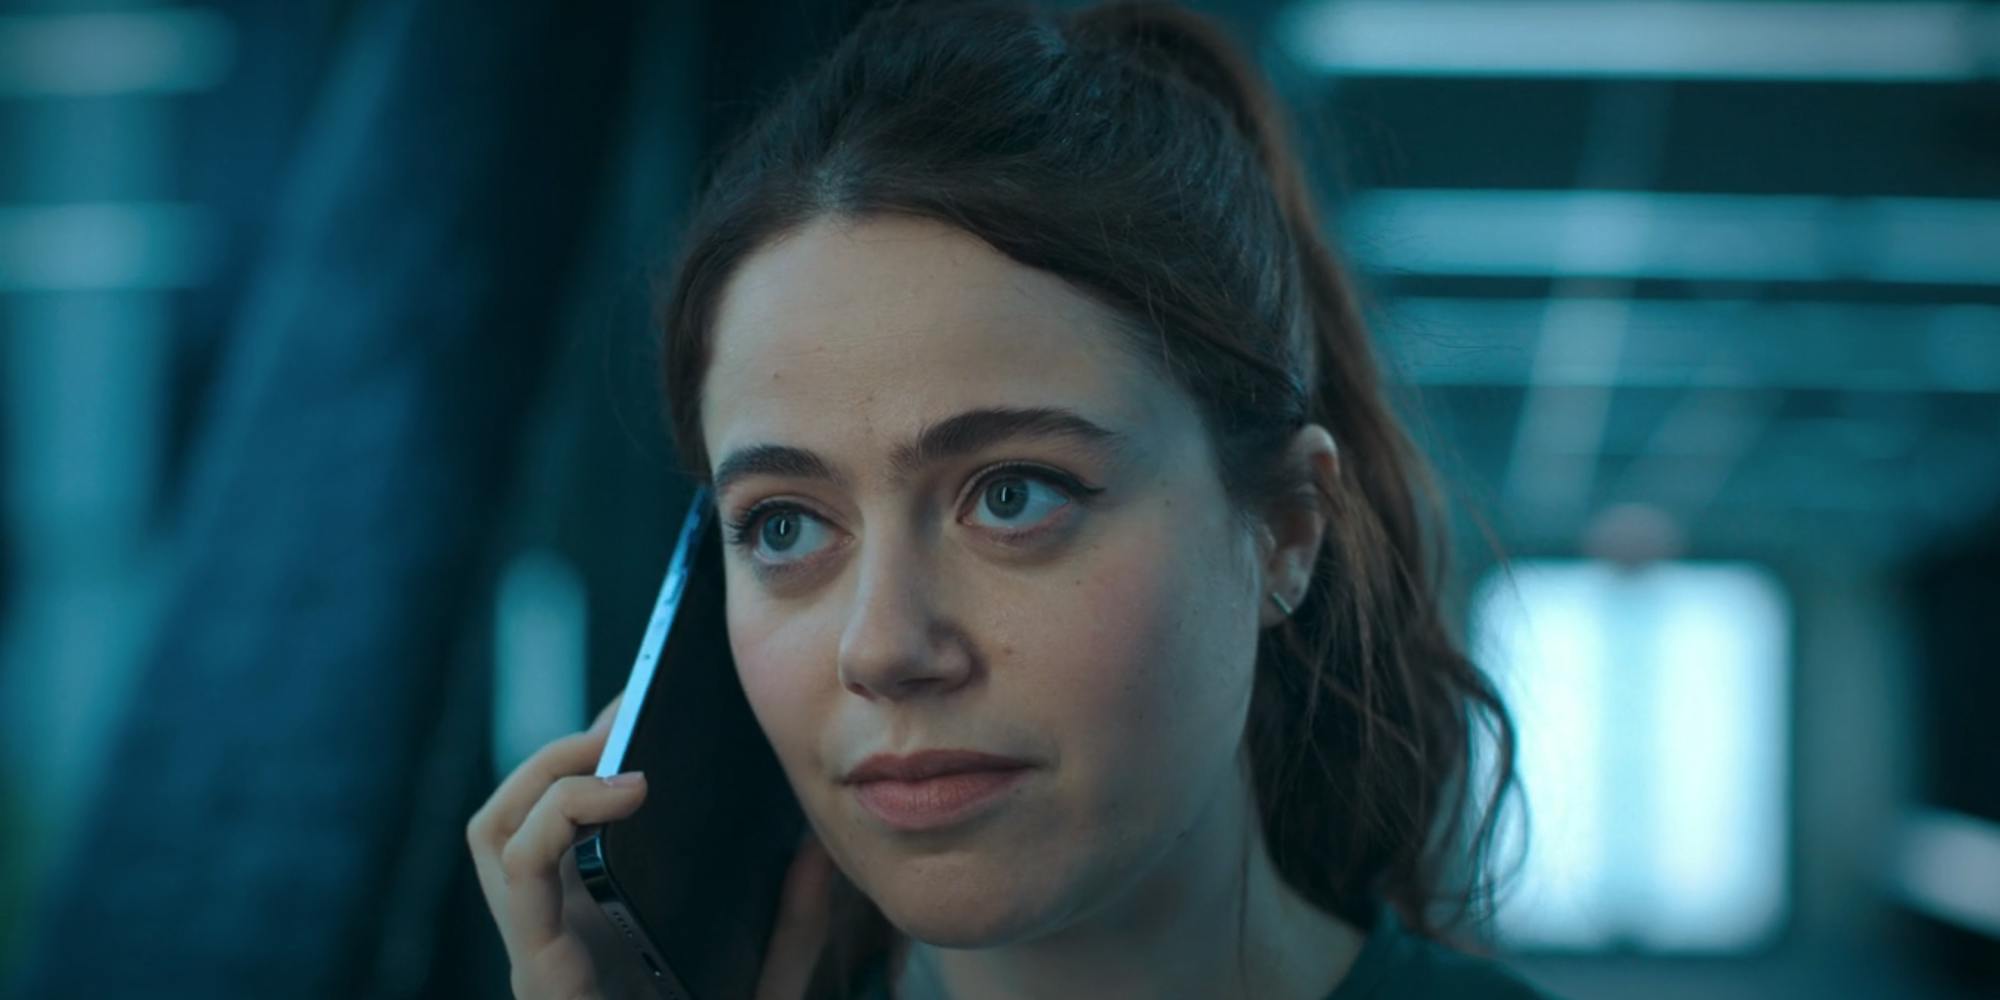 Molly Gordon holding a cellphone and wearing a ponytail in an episode of Hulu's The Bears season 2